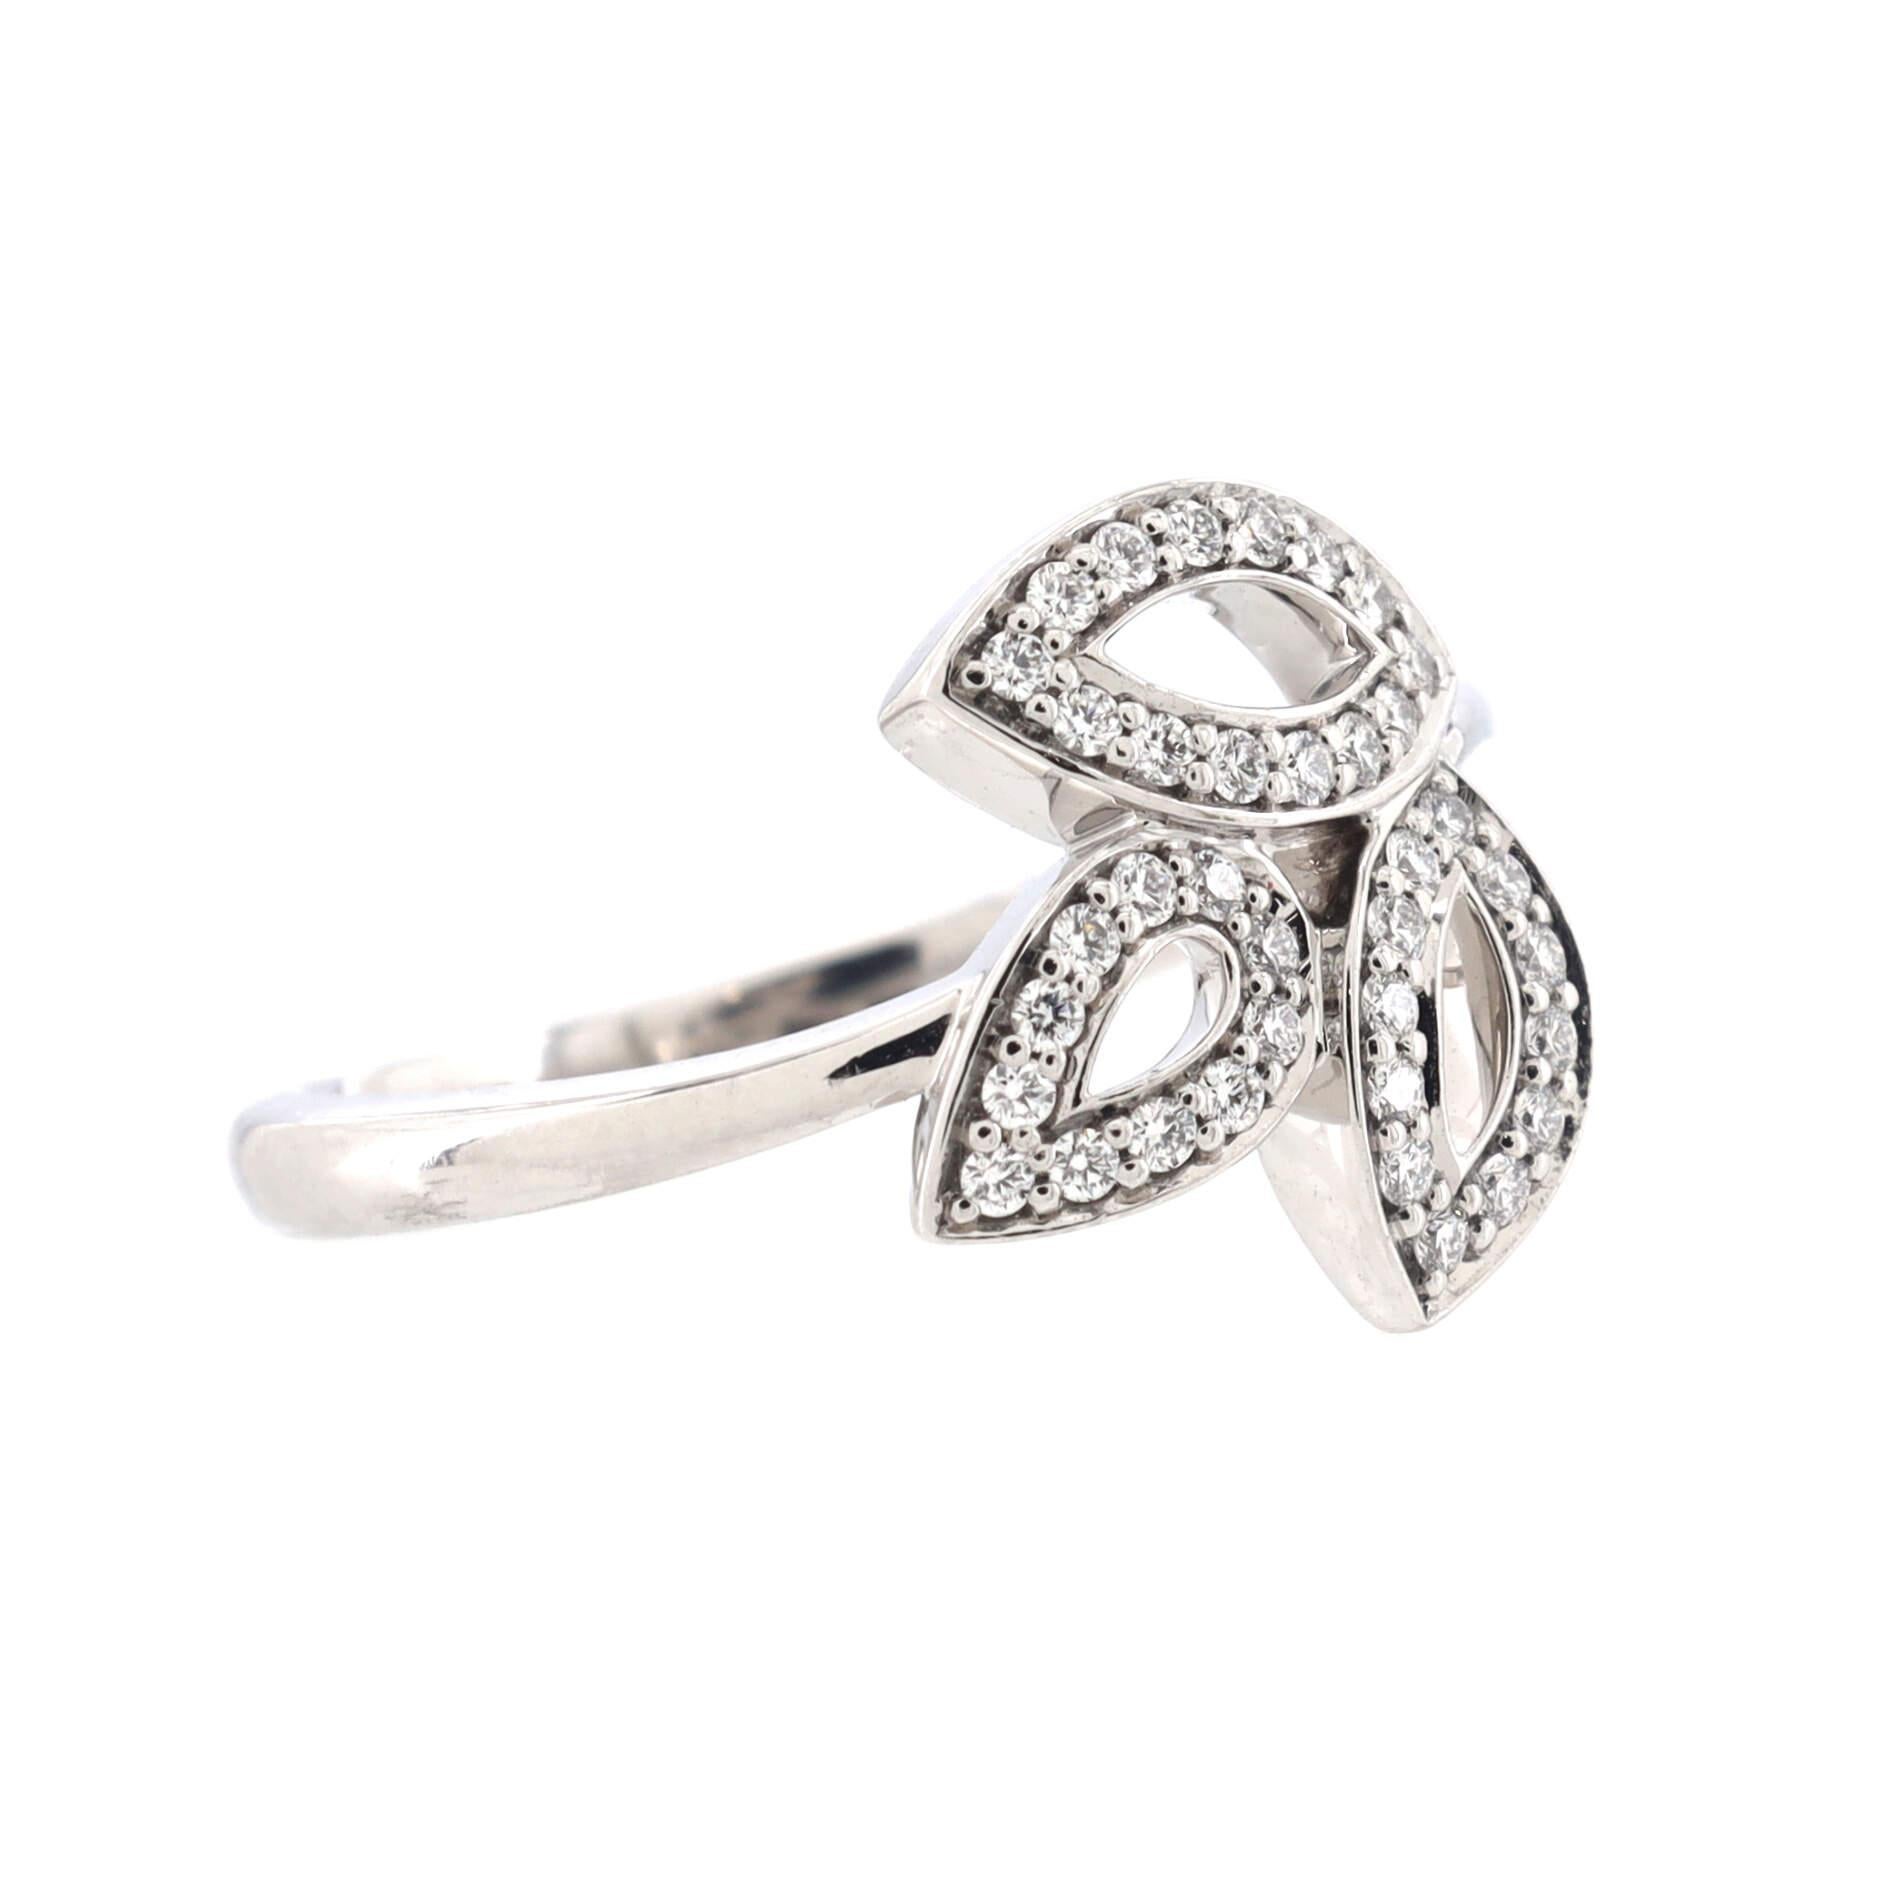 Condition: Great. Minor wear throughout.
Accessories: No Accessories
Measurements: Size: 6 - 52, Width: 2.00 mm
Designer: Harry Winston
Model: Lily Cluster Ring Platinum with Diamonds Mini
Exterior Color: Silver
Item Number: 188470/6